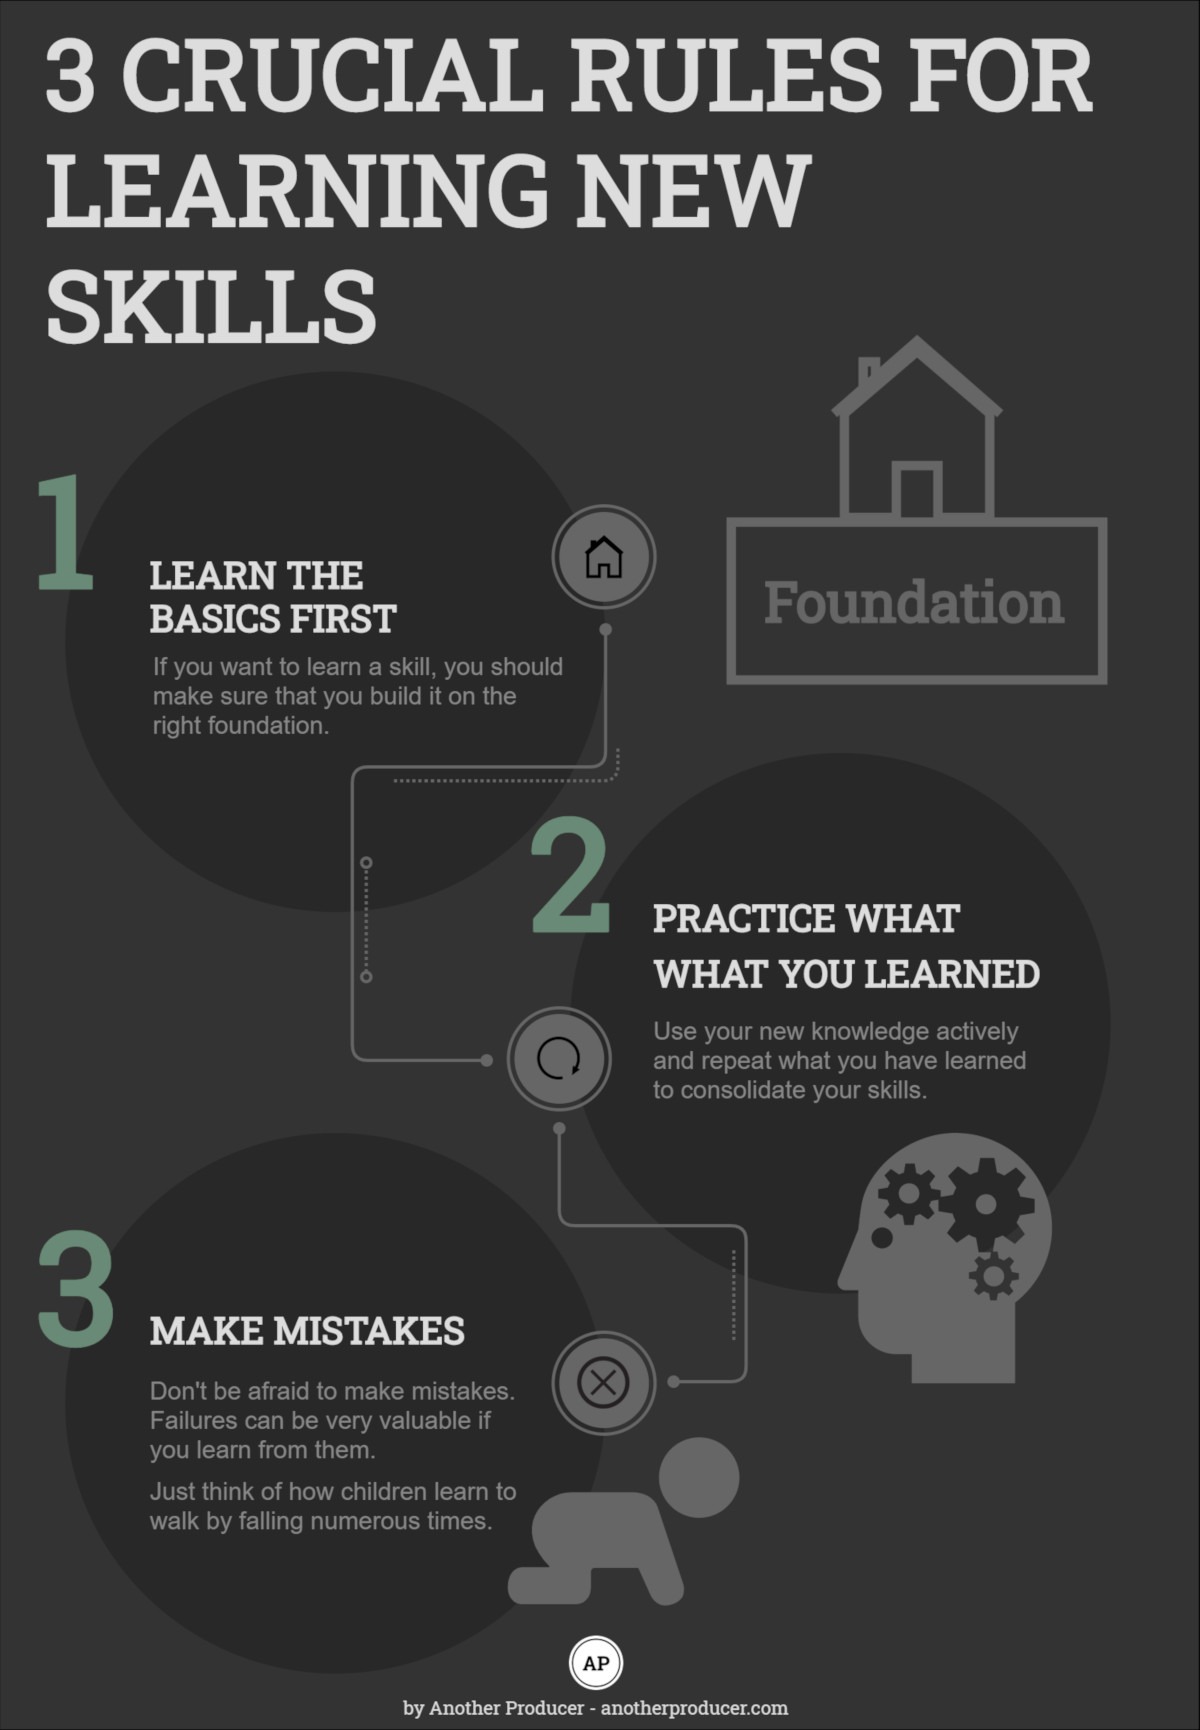 Infographic rules for learning skills